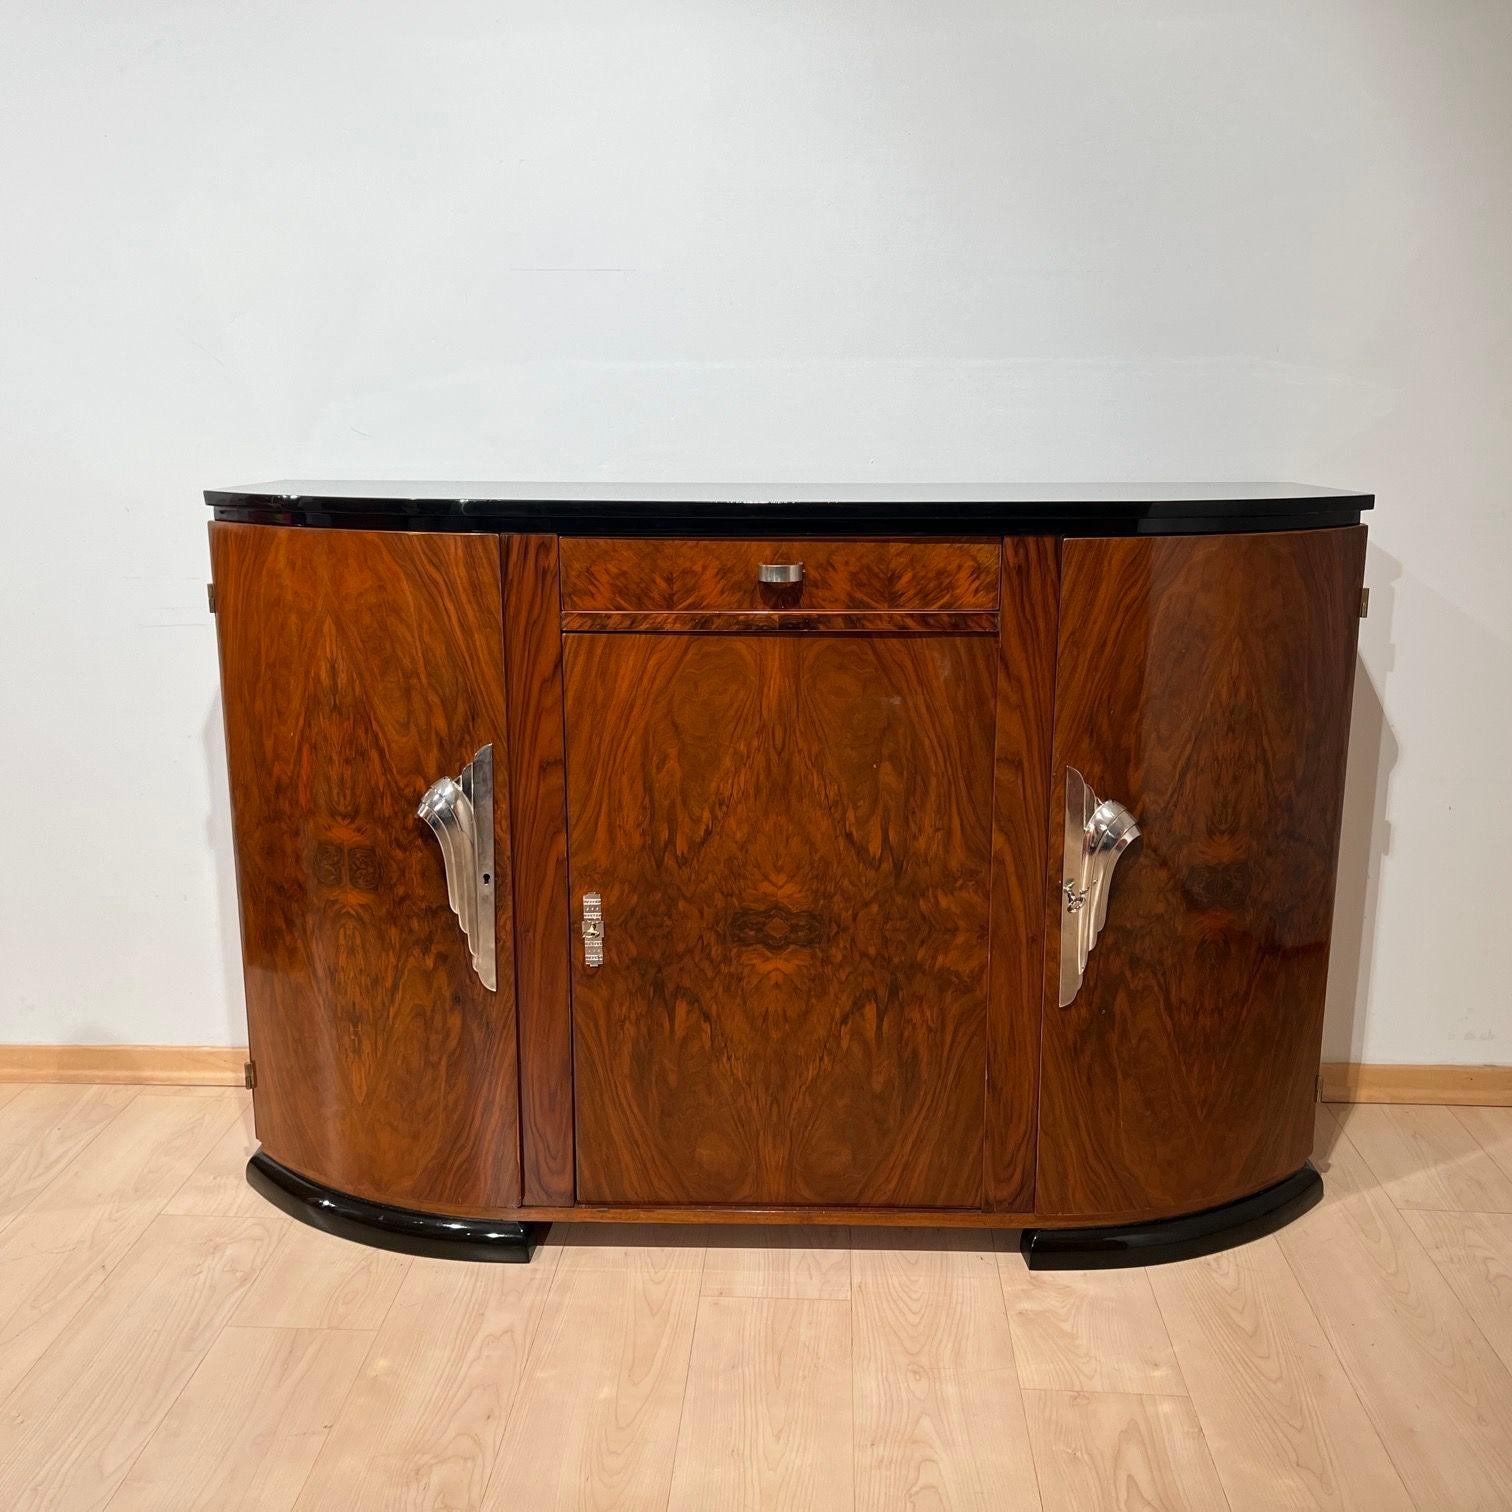 Lacquered Art Deco Sideboard, Walnut Veneer, Black Lacquer, Nickel, France circa 1930 For Sale